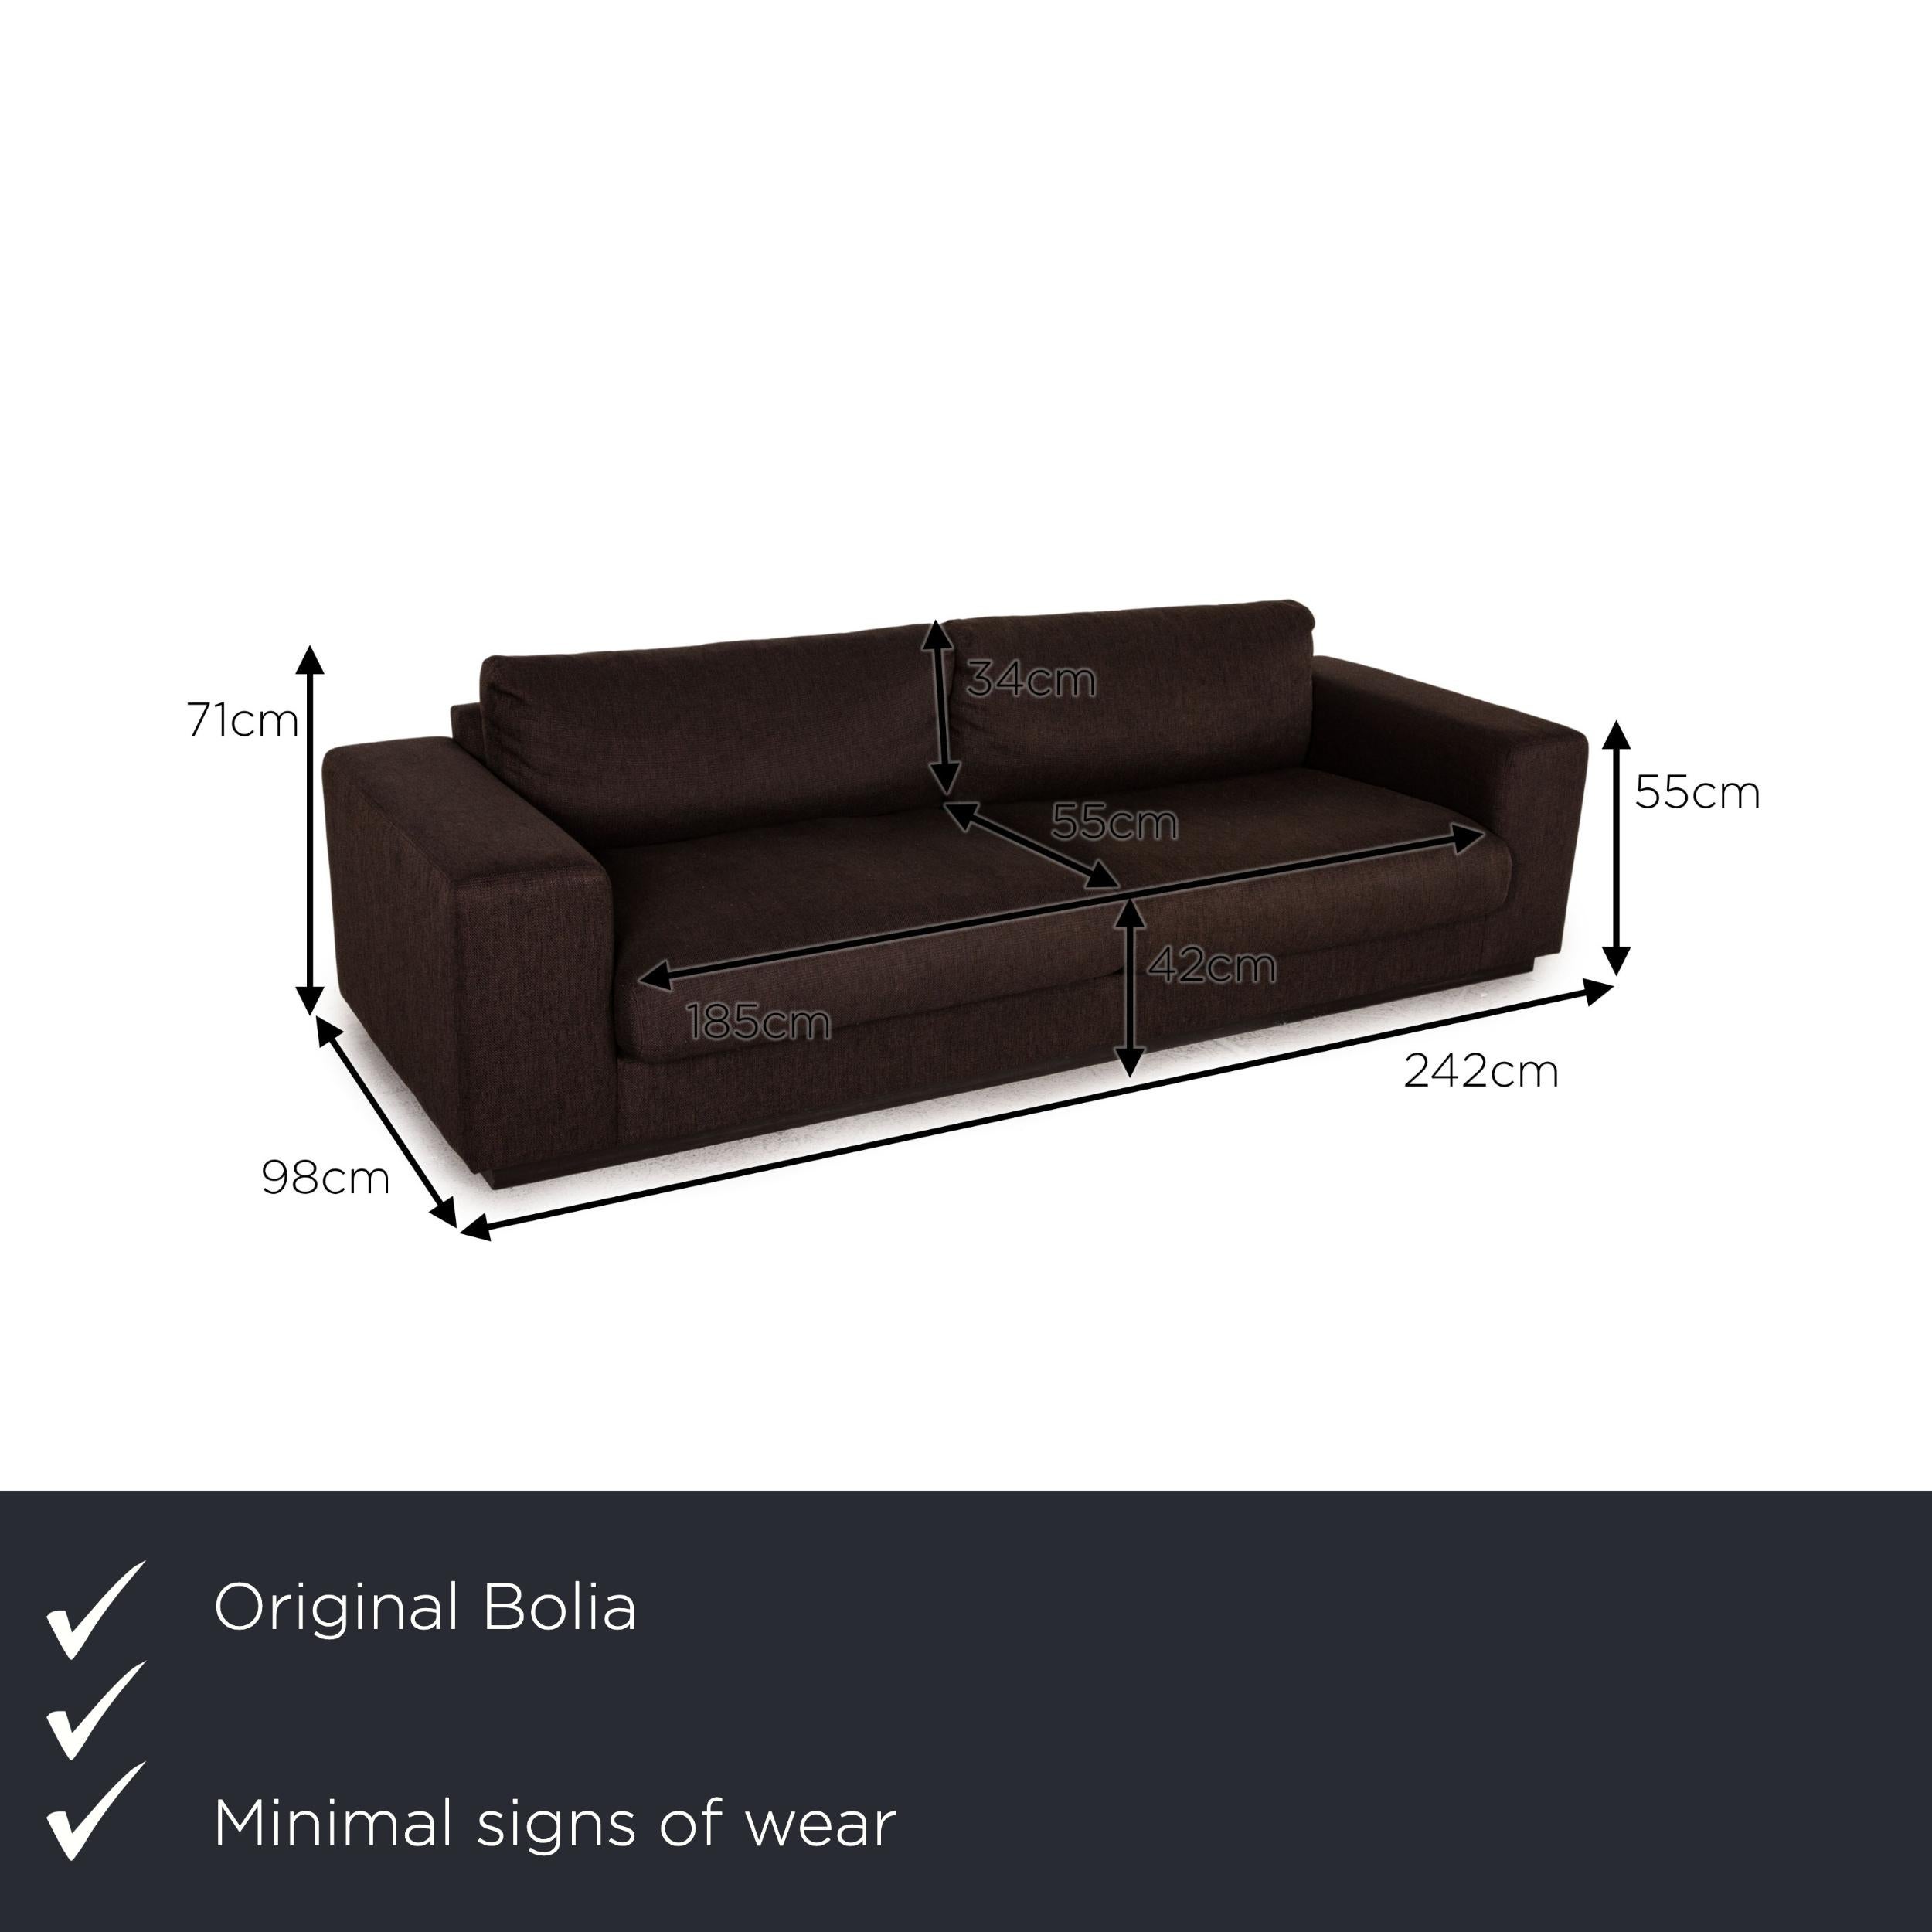 Bolia Sepia Fabric Sofa Dark Brown Three-Seater Couch For Sale at 1stDibs